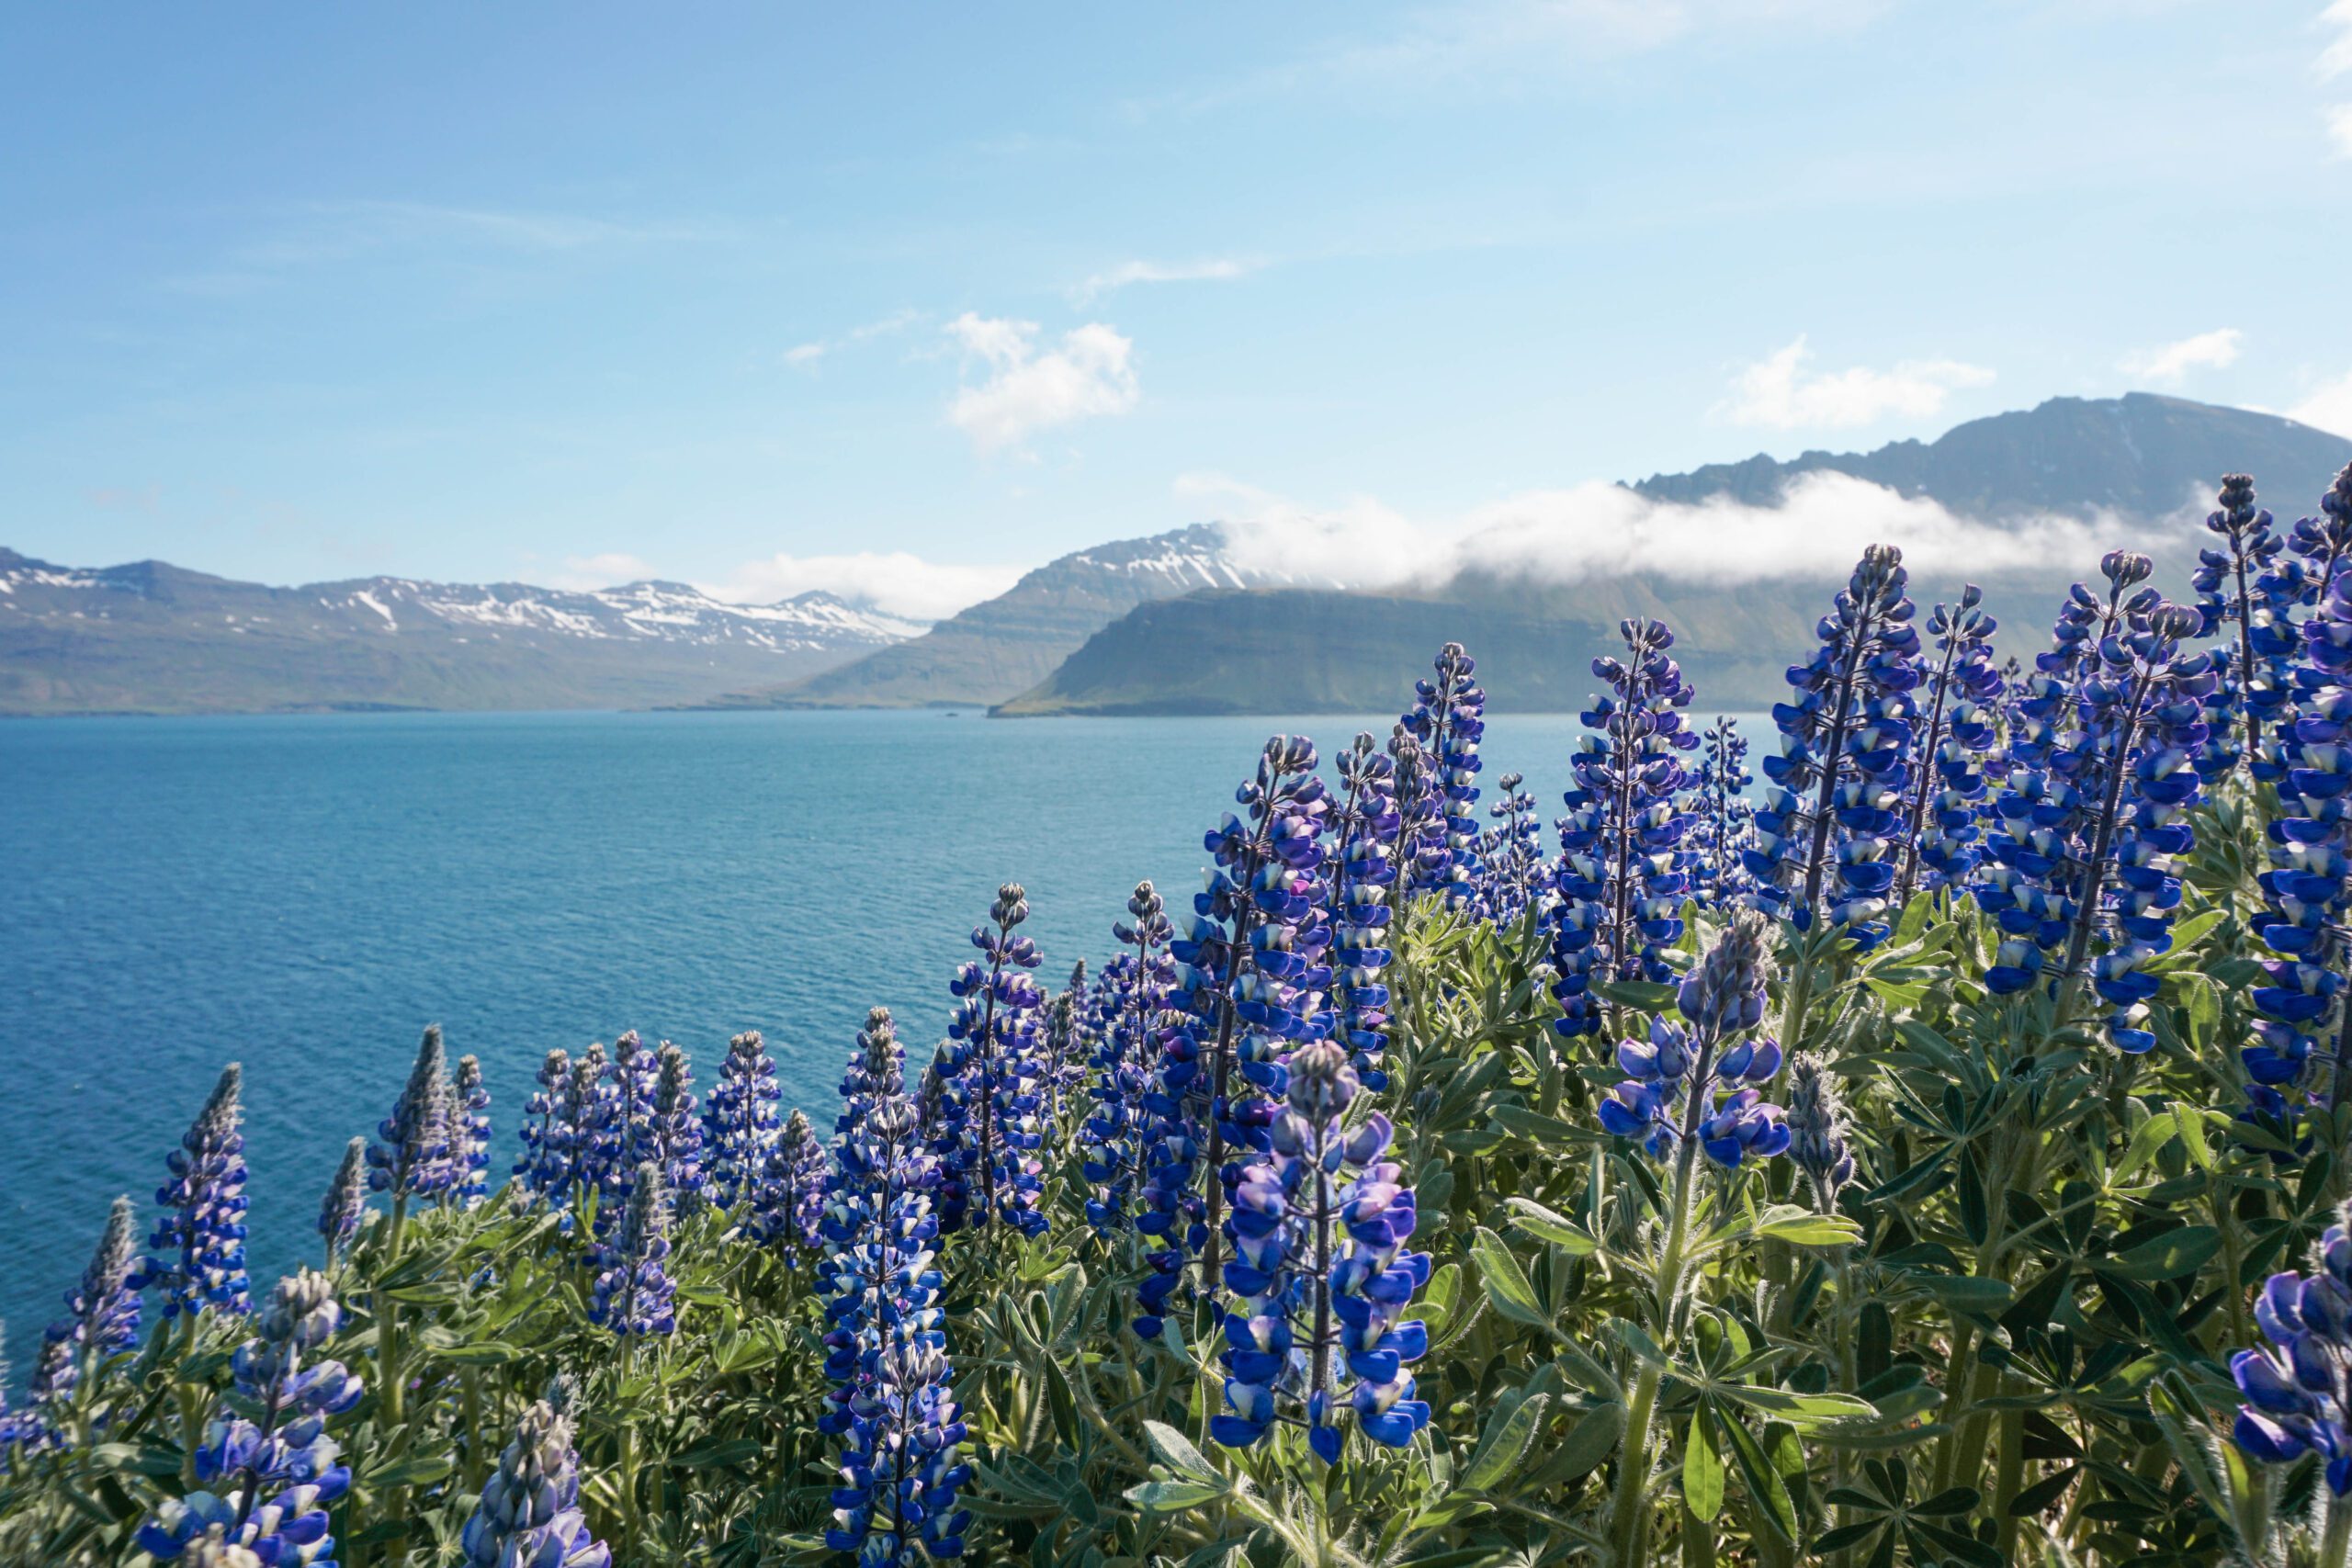 Ready for Summer in Iceland? Unlimited Hours to Explore, Amazing Sites & More